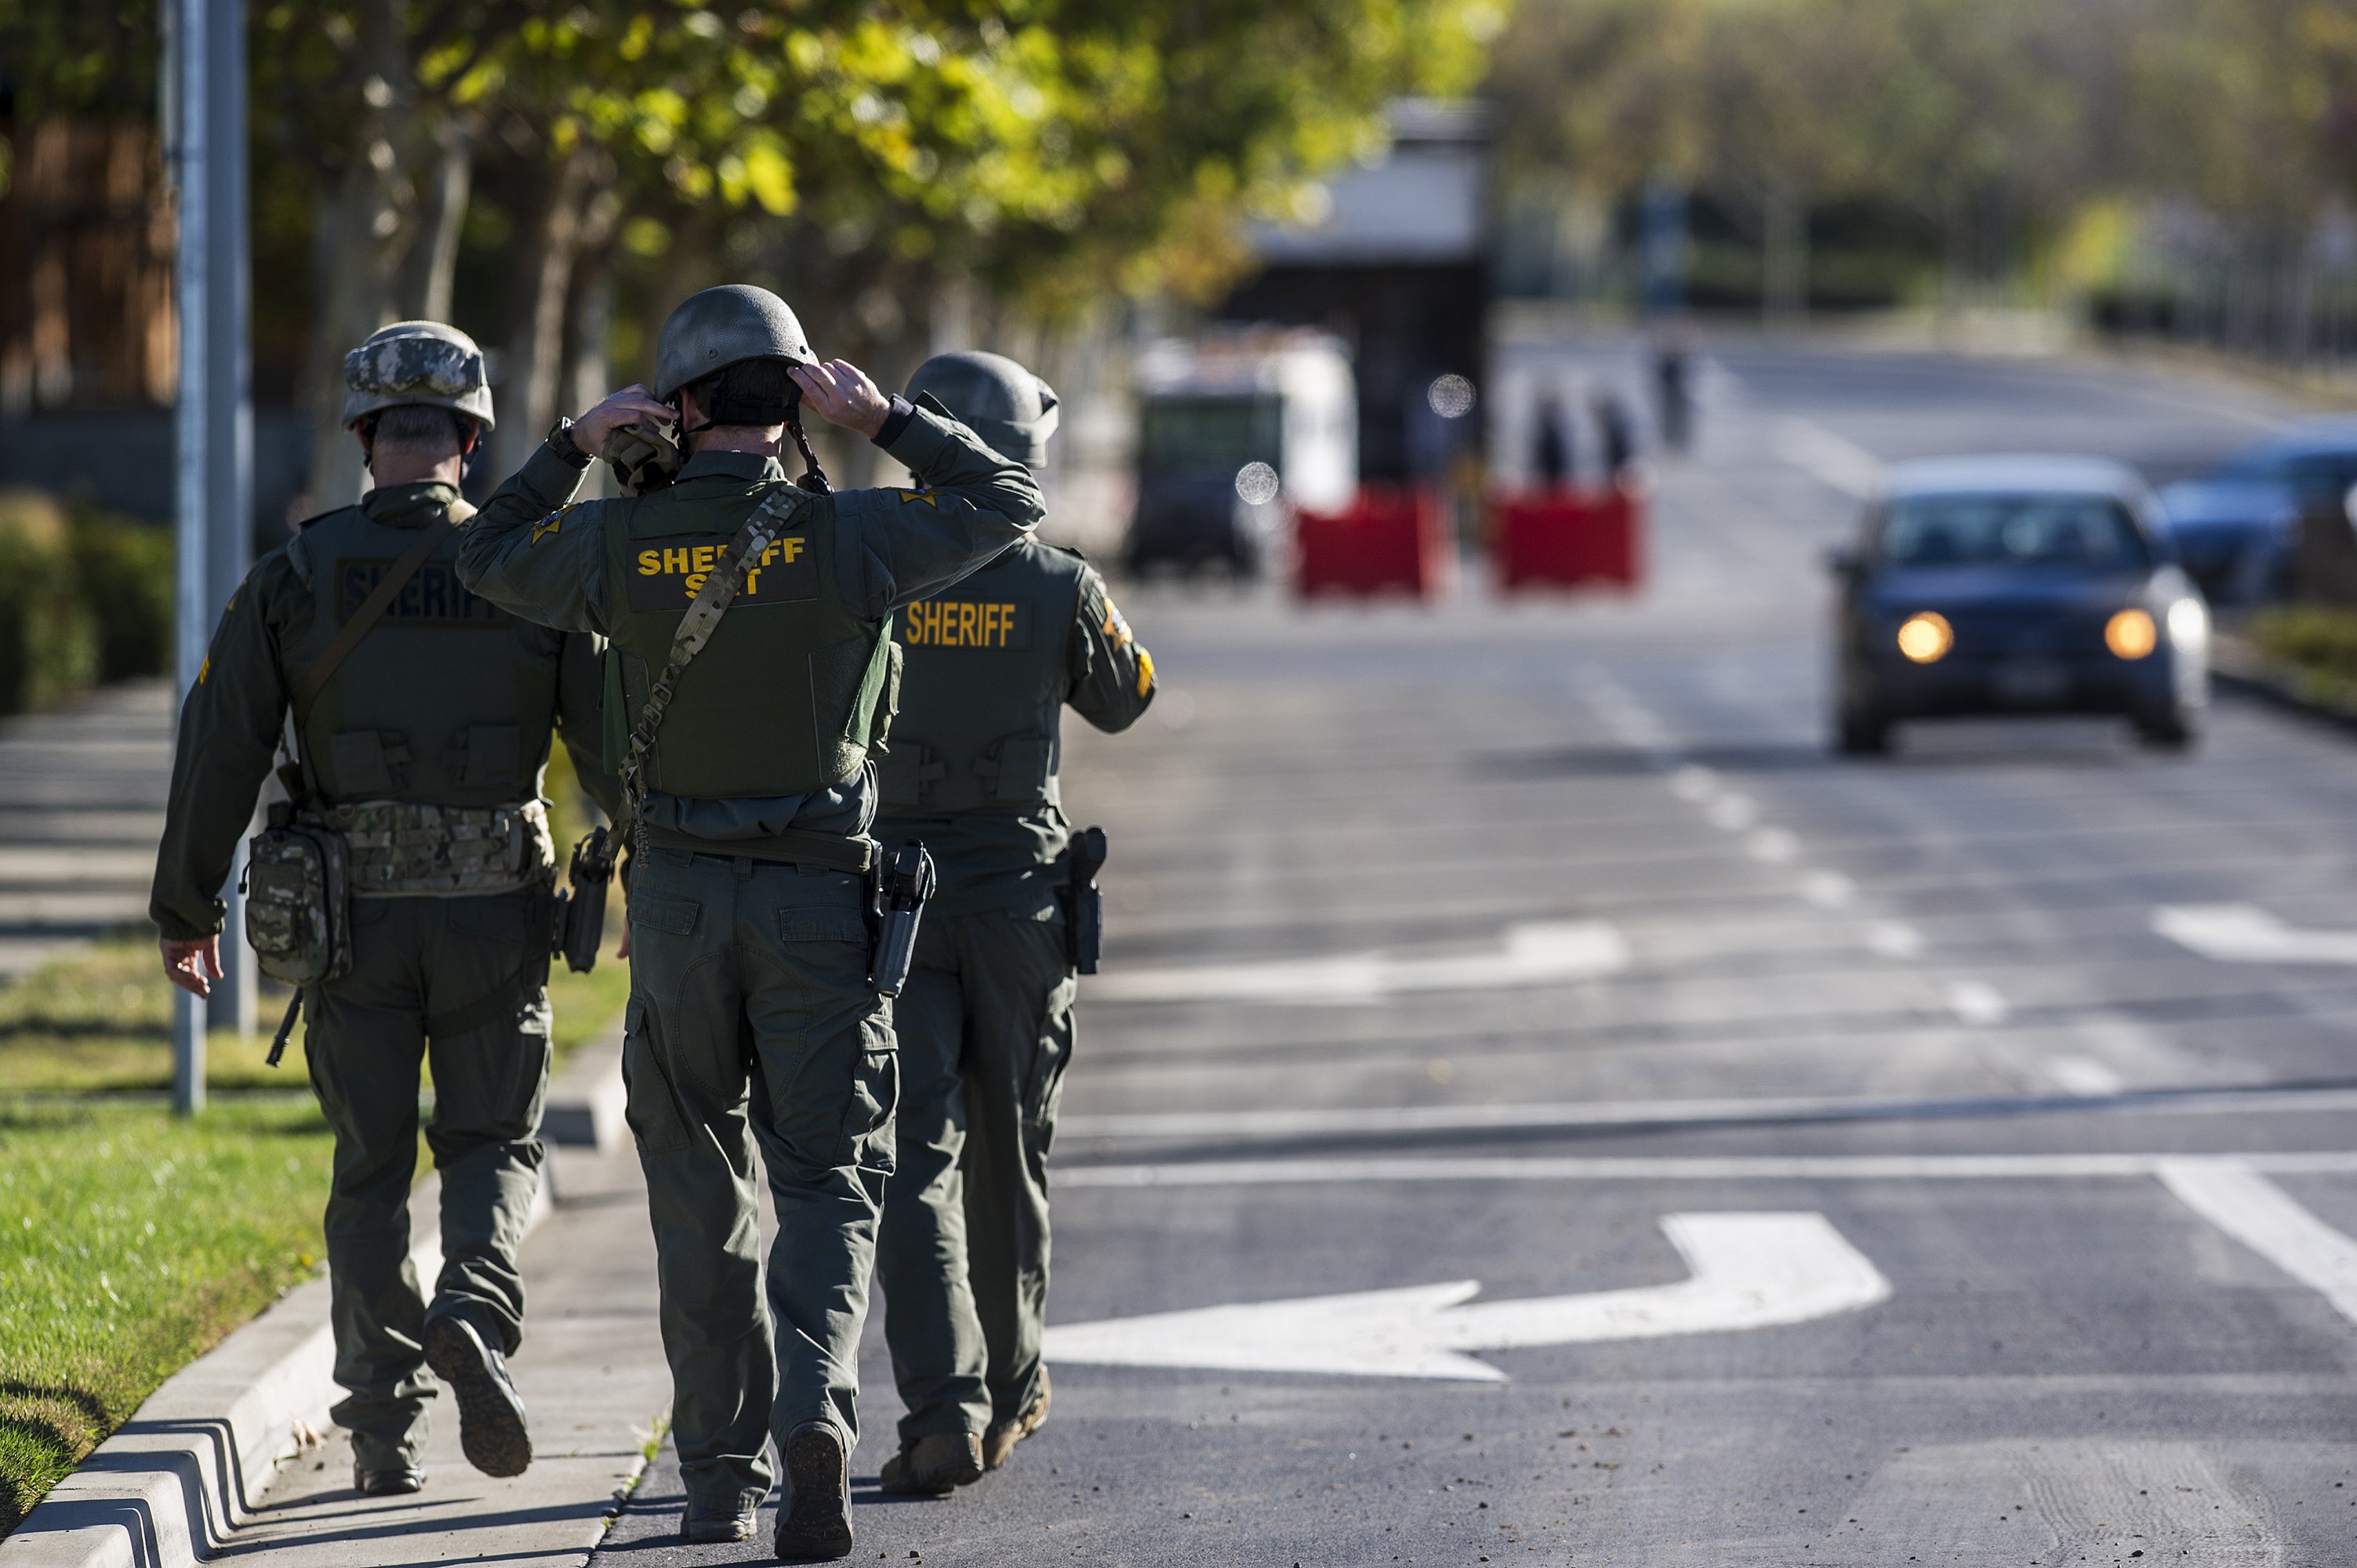 Merced County Sheriff SWAT members enter the University of California, Merced campus after a reported stabbing in Merced, Calif. on Nov. 4, 2015. (Andrew Kuhn—AP)